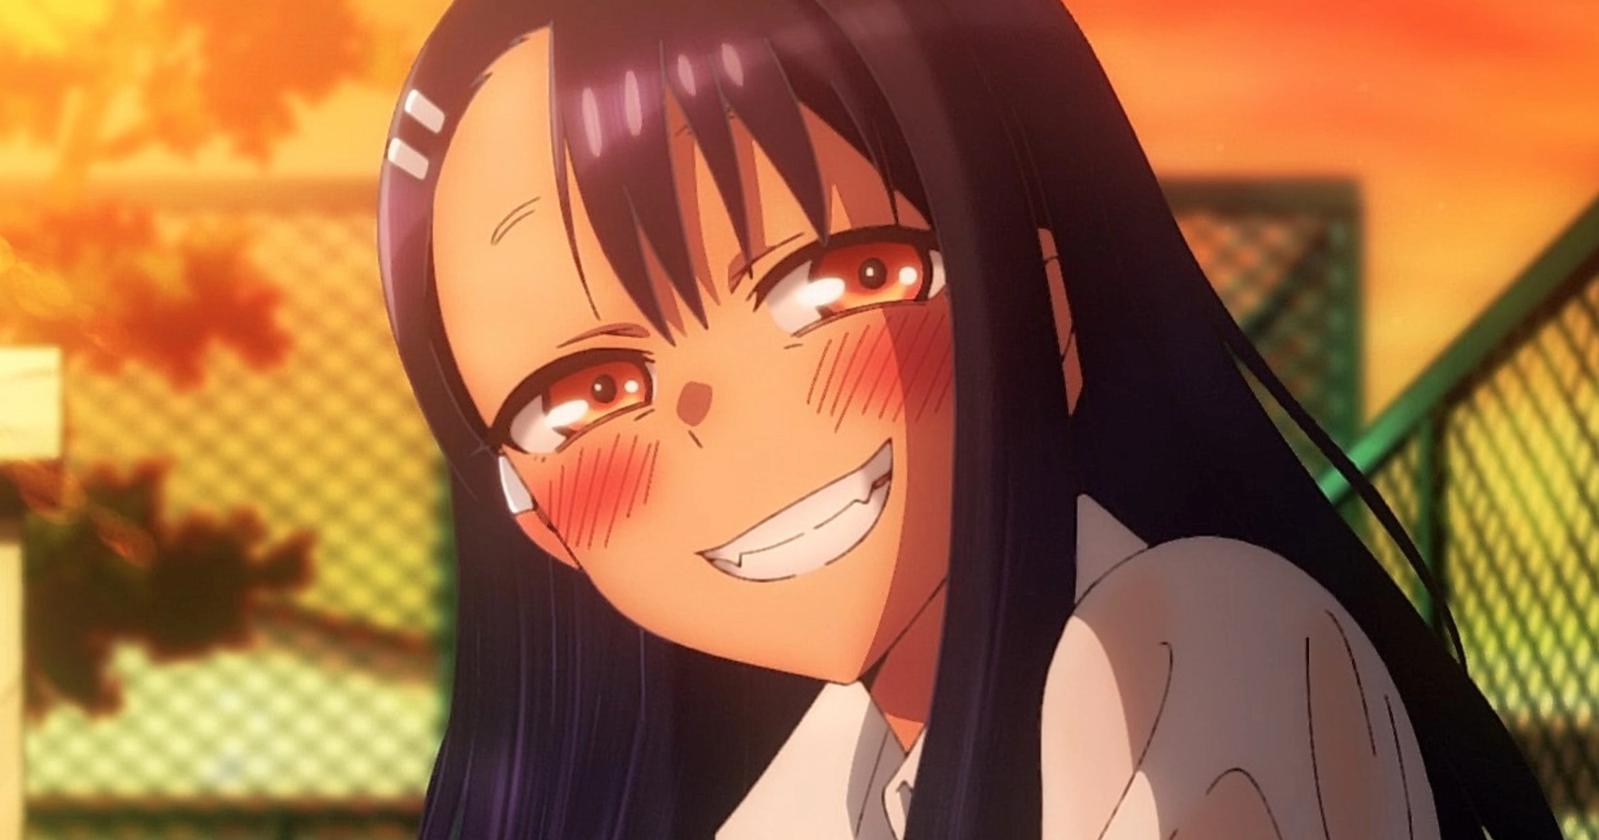 Don't Toy With Me, Miss Nagatoro Season 2 Release Date: When to